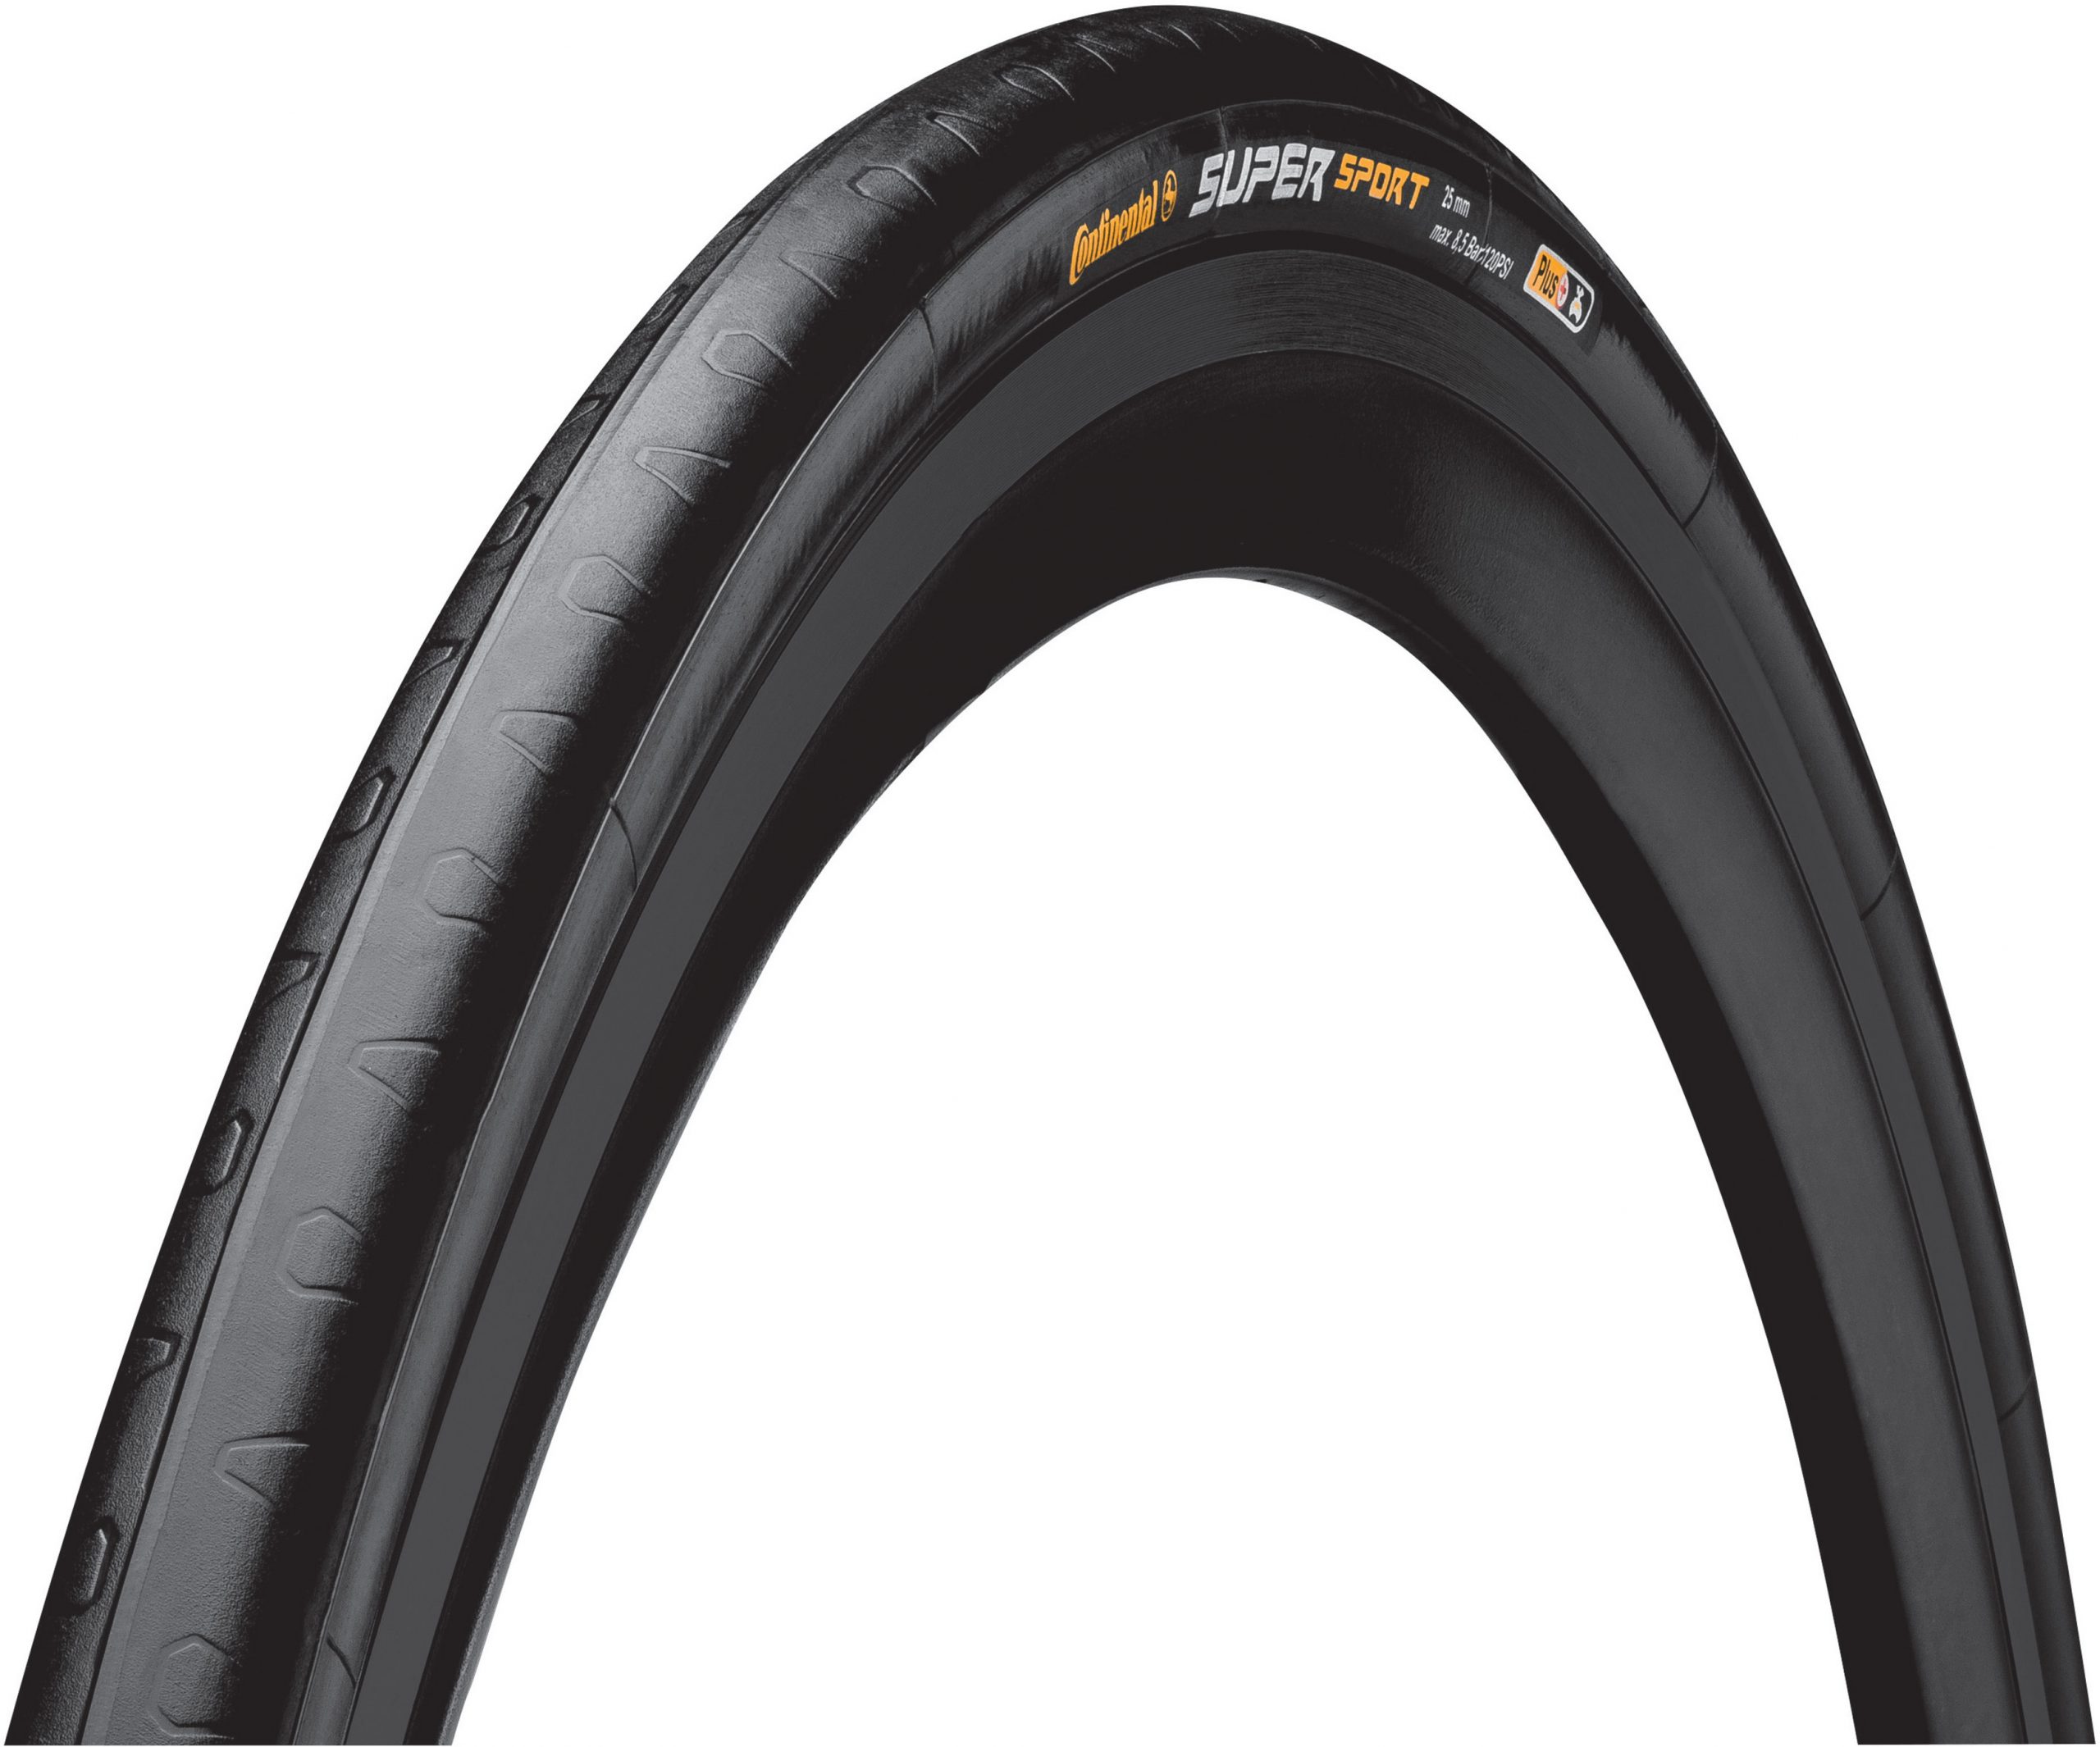 New 2 Pack Continental SuperSport Plus 700 x 23c Puncture Resistant Road Tire 